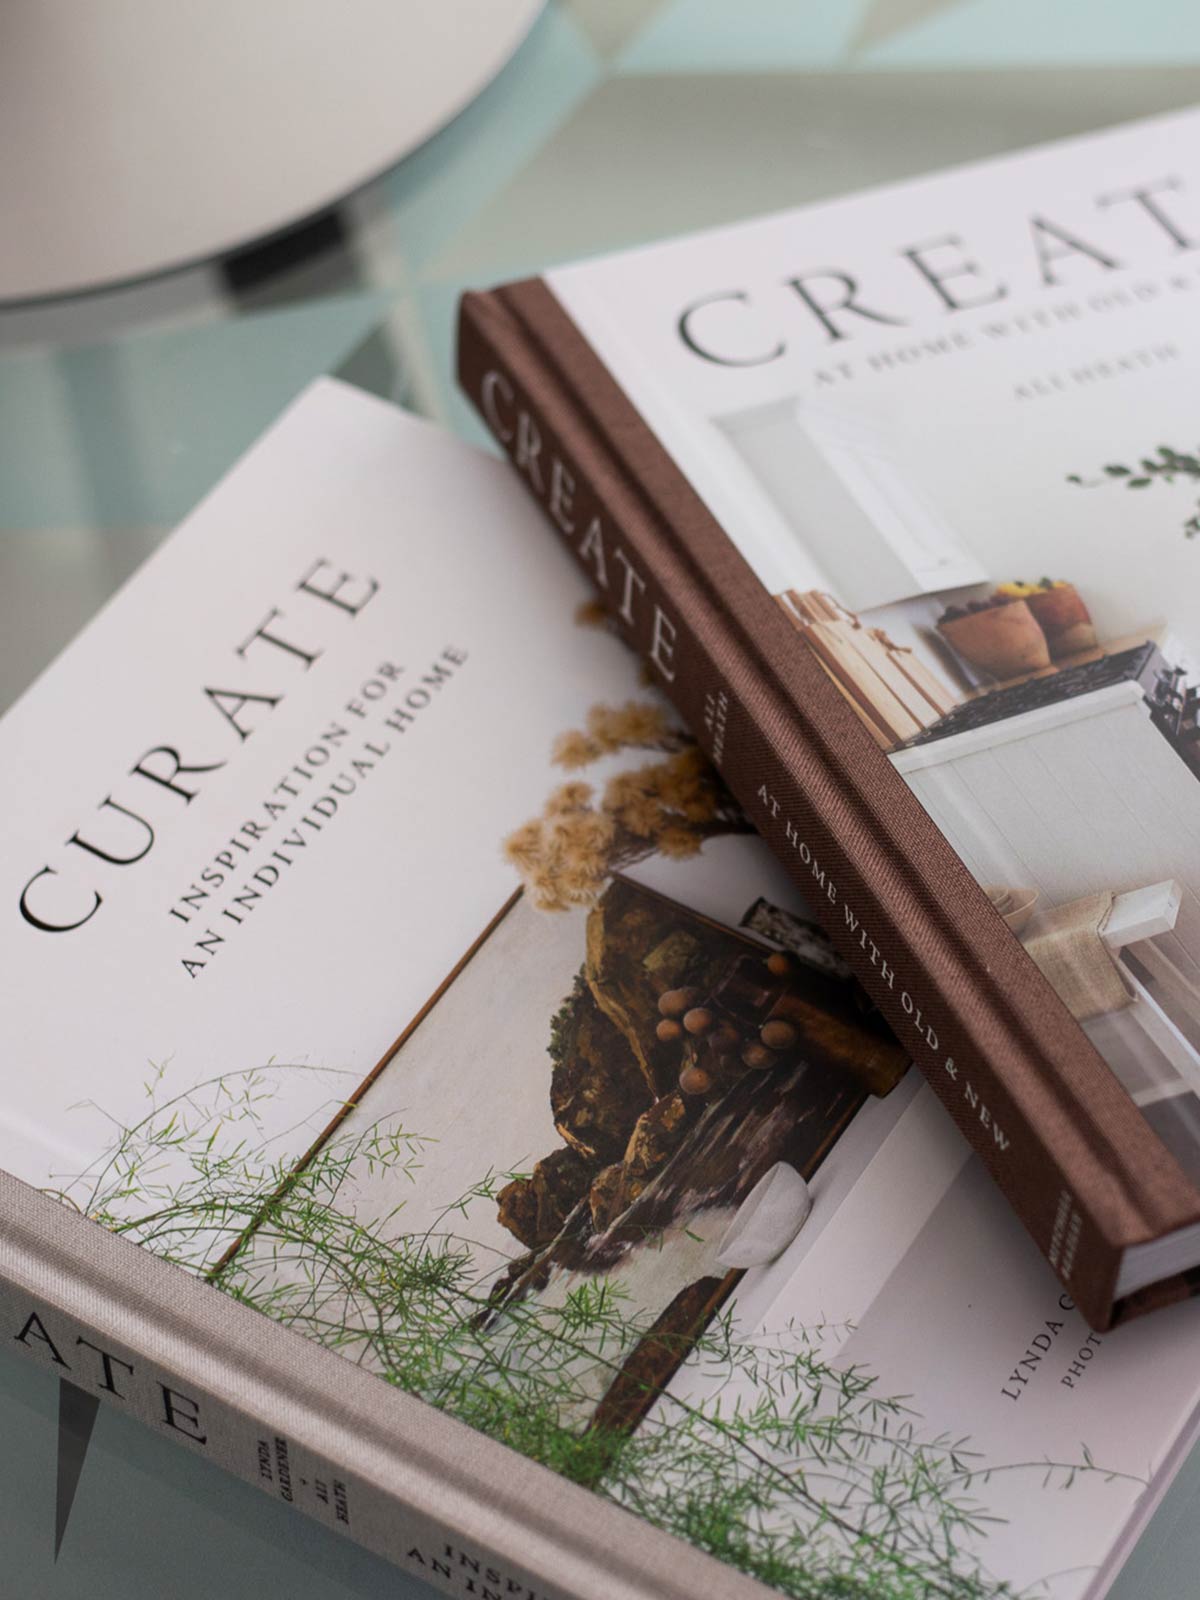 Create: At Home with Old & New